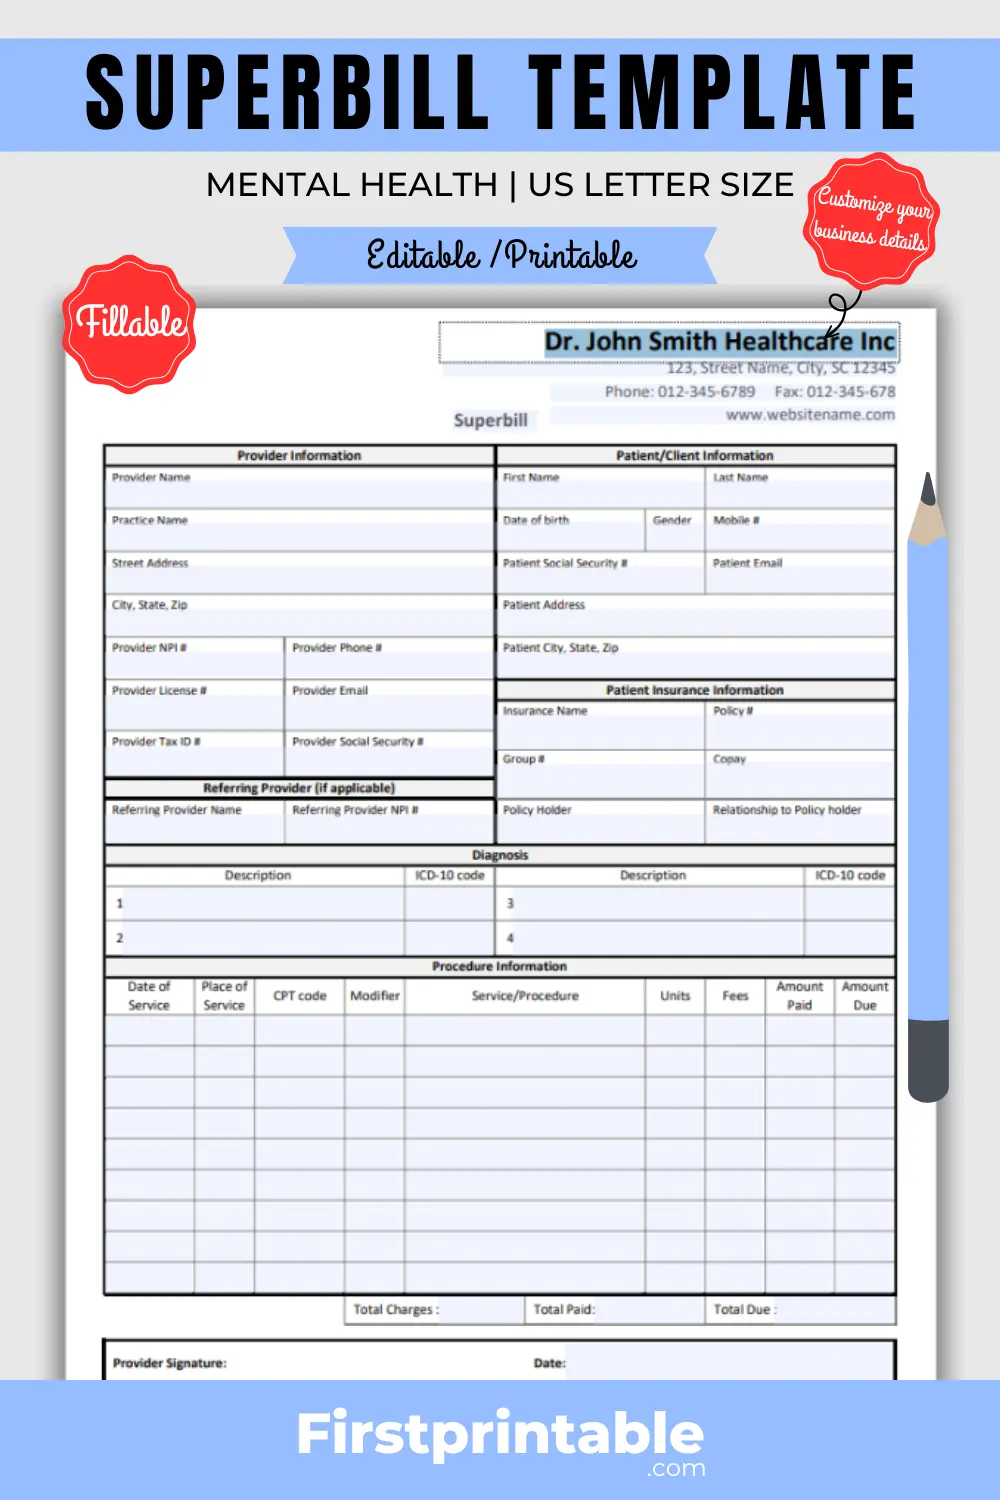 superbill template for mental health icd 10